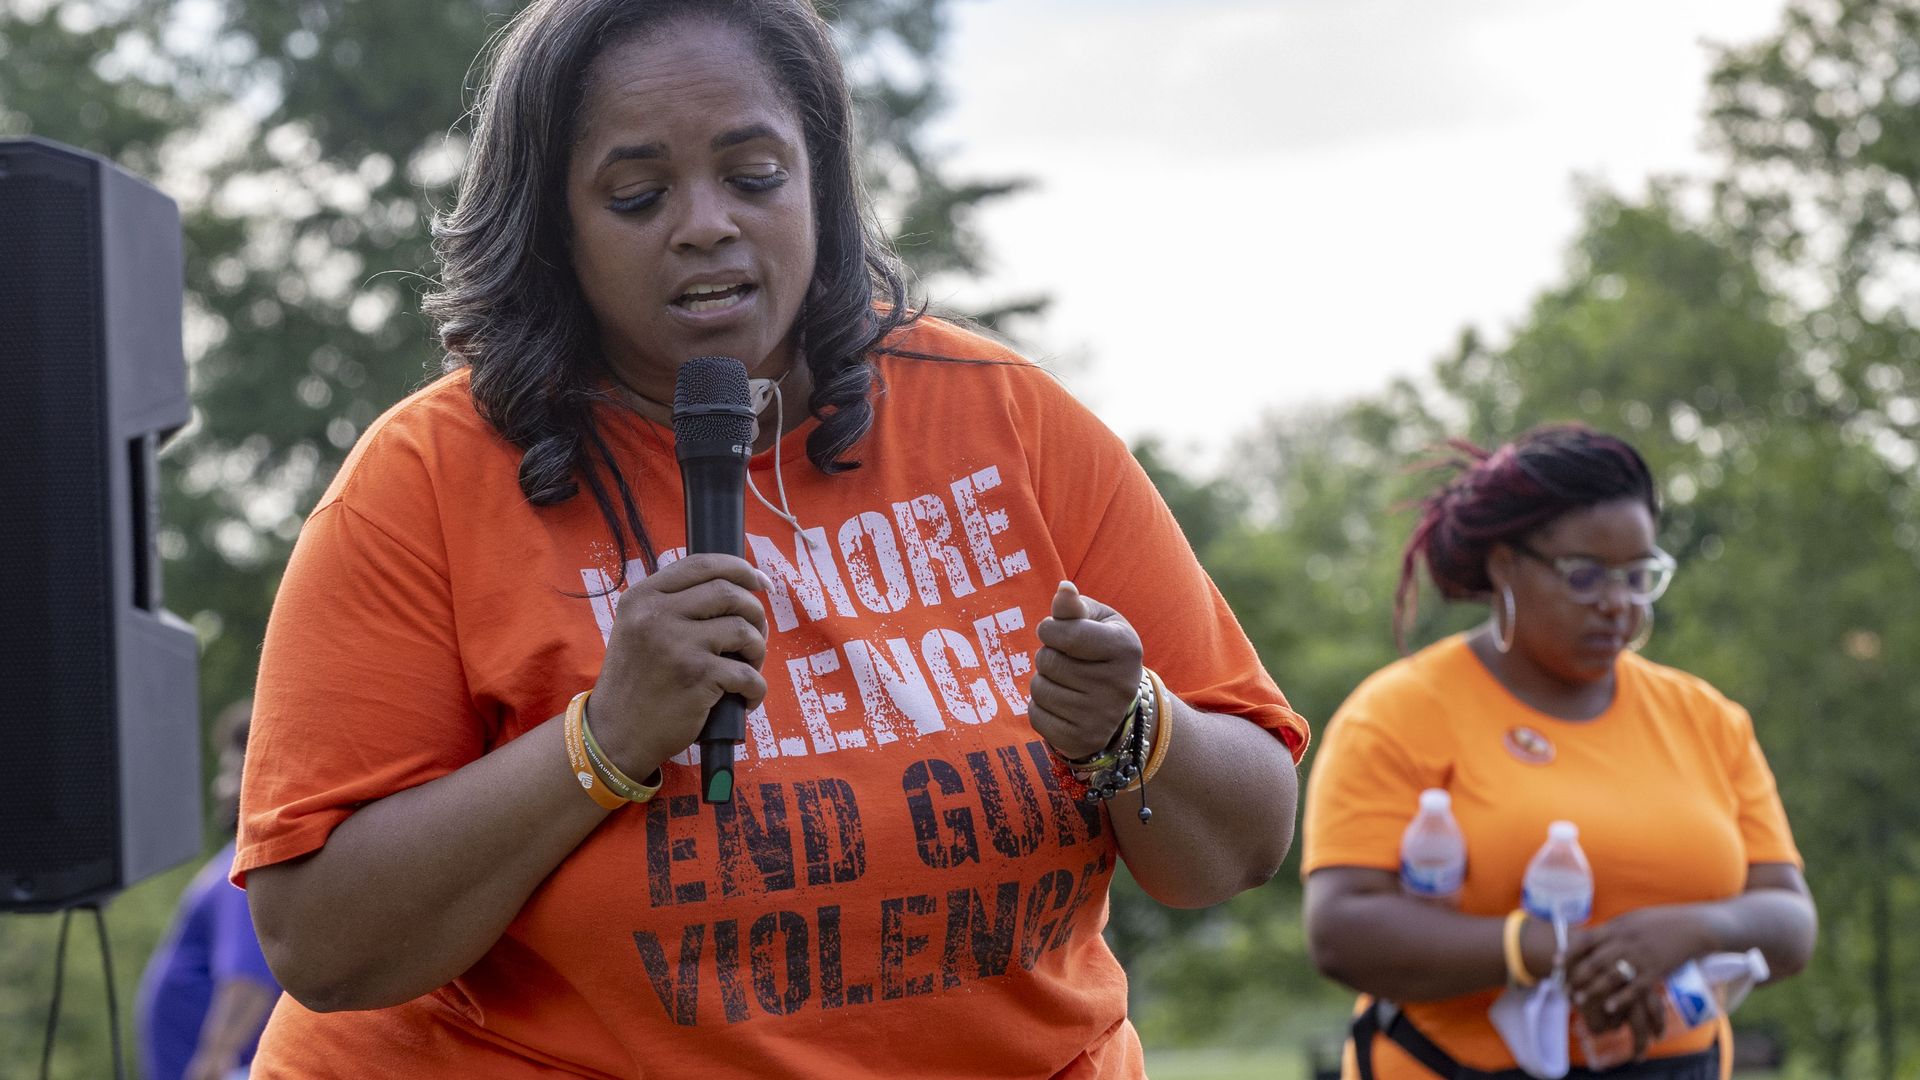 Members of Mothers of Murdered Columbus Children speak at an anti-violence rally.